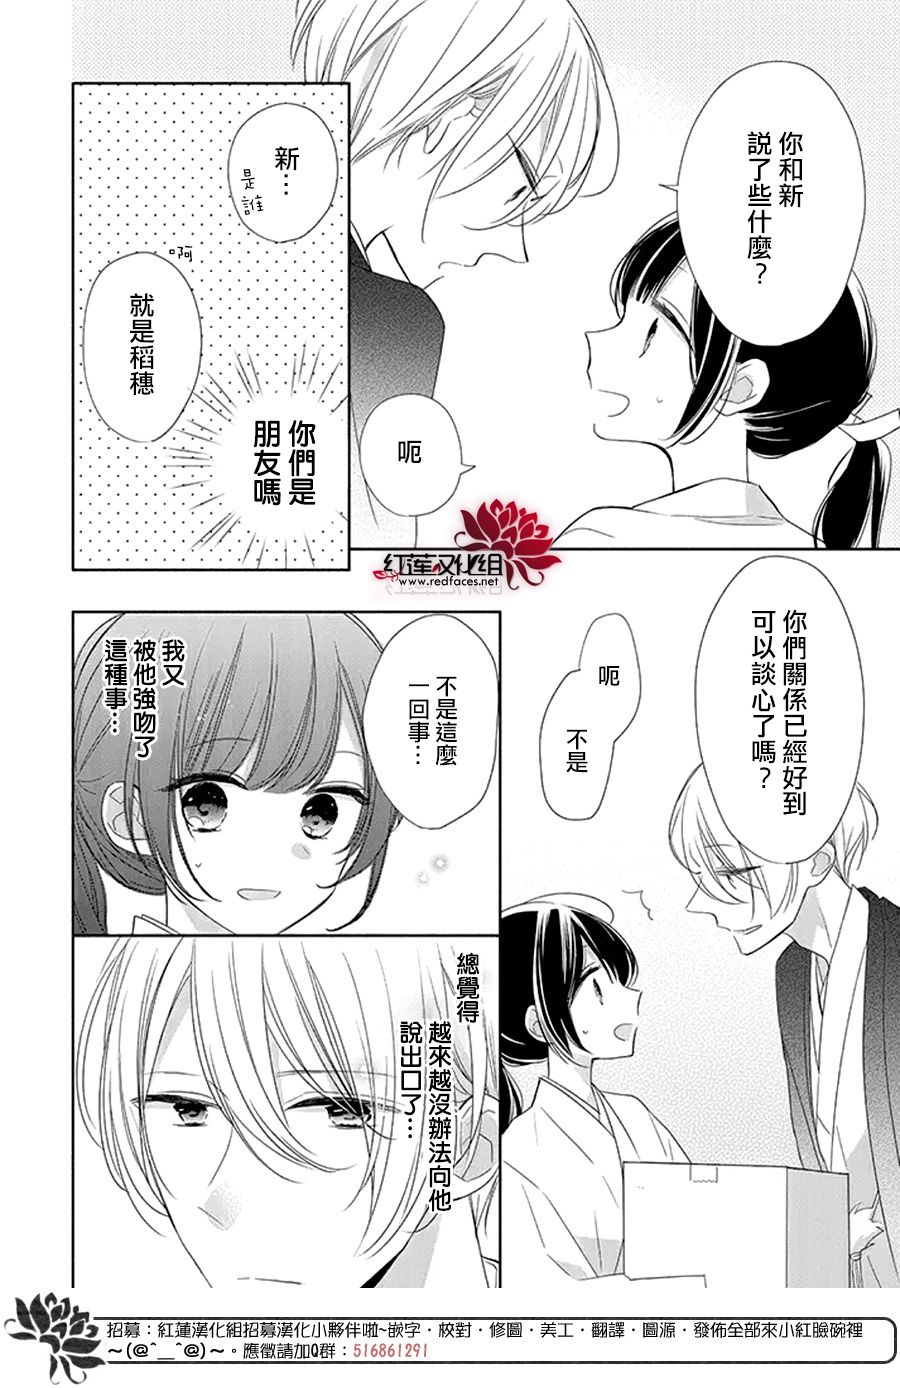 If given a second chance - 25話 - 4